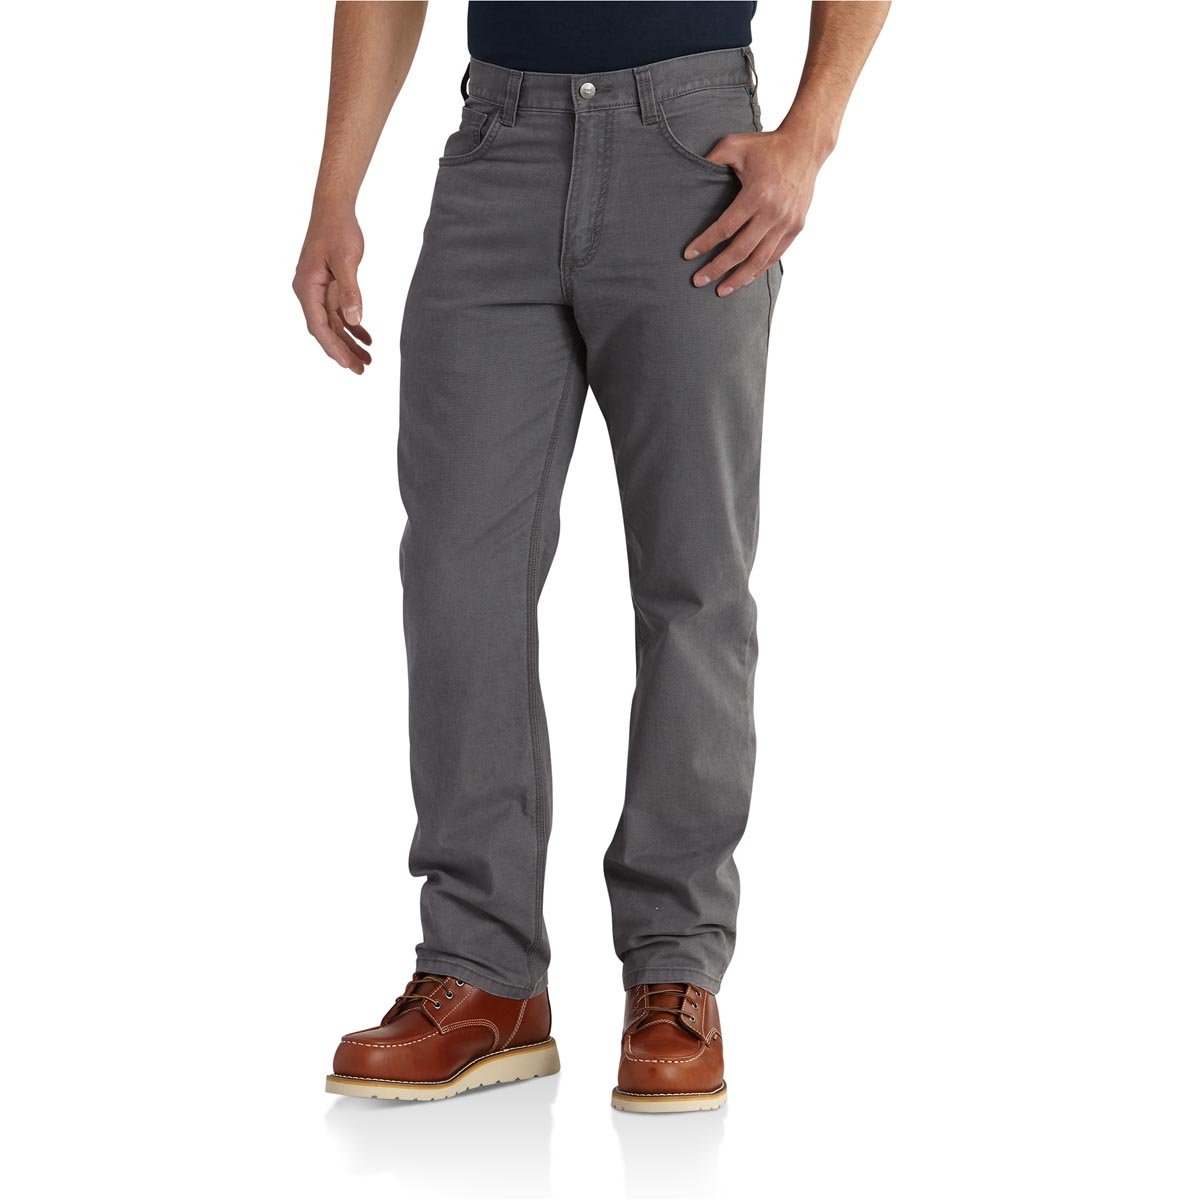 Carhartt Men's 5 Pocket Relaxed Fit Pant